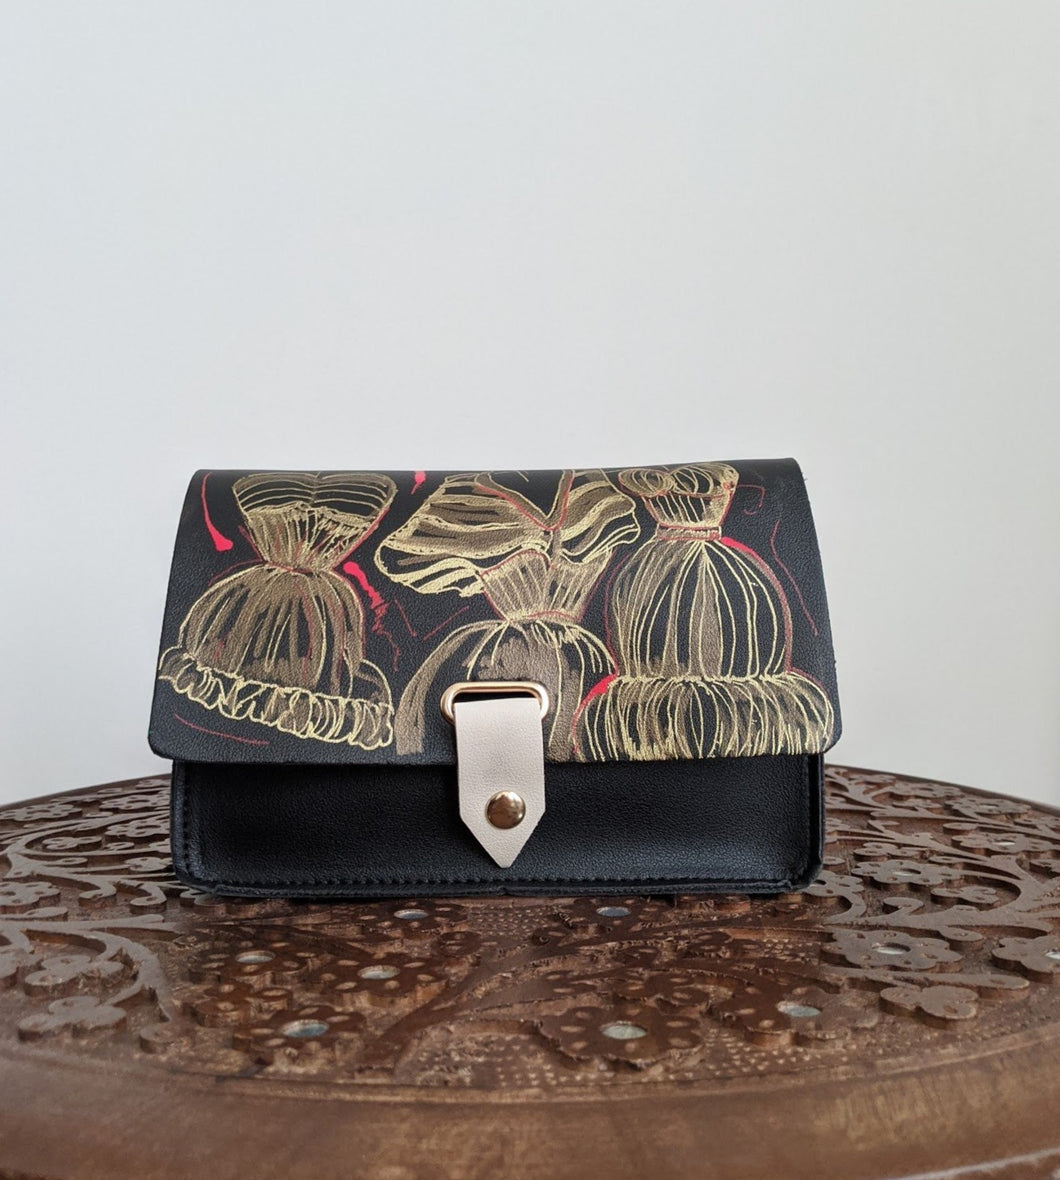 This hand painted faux leather bag adds flair and pizzazz to your everyday attire. Day to night with a little black dress or with jeans. Dress it up or down.